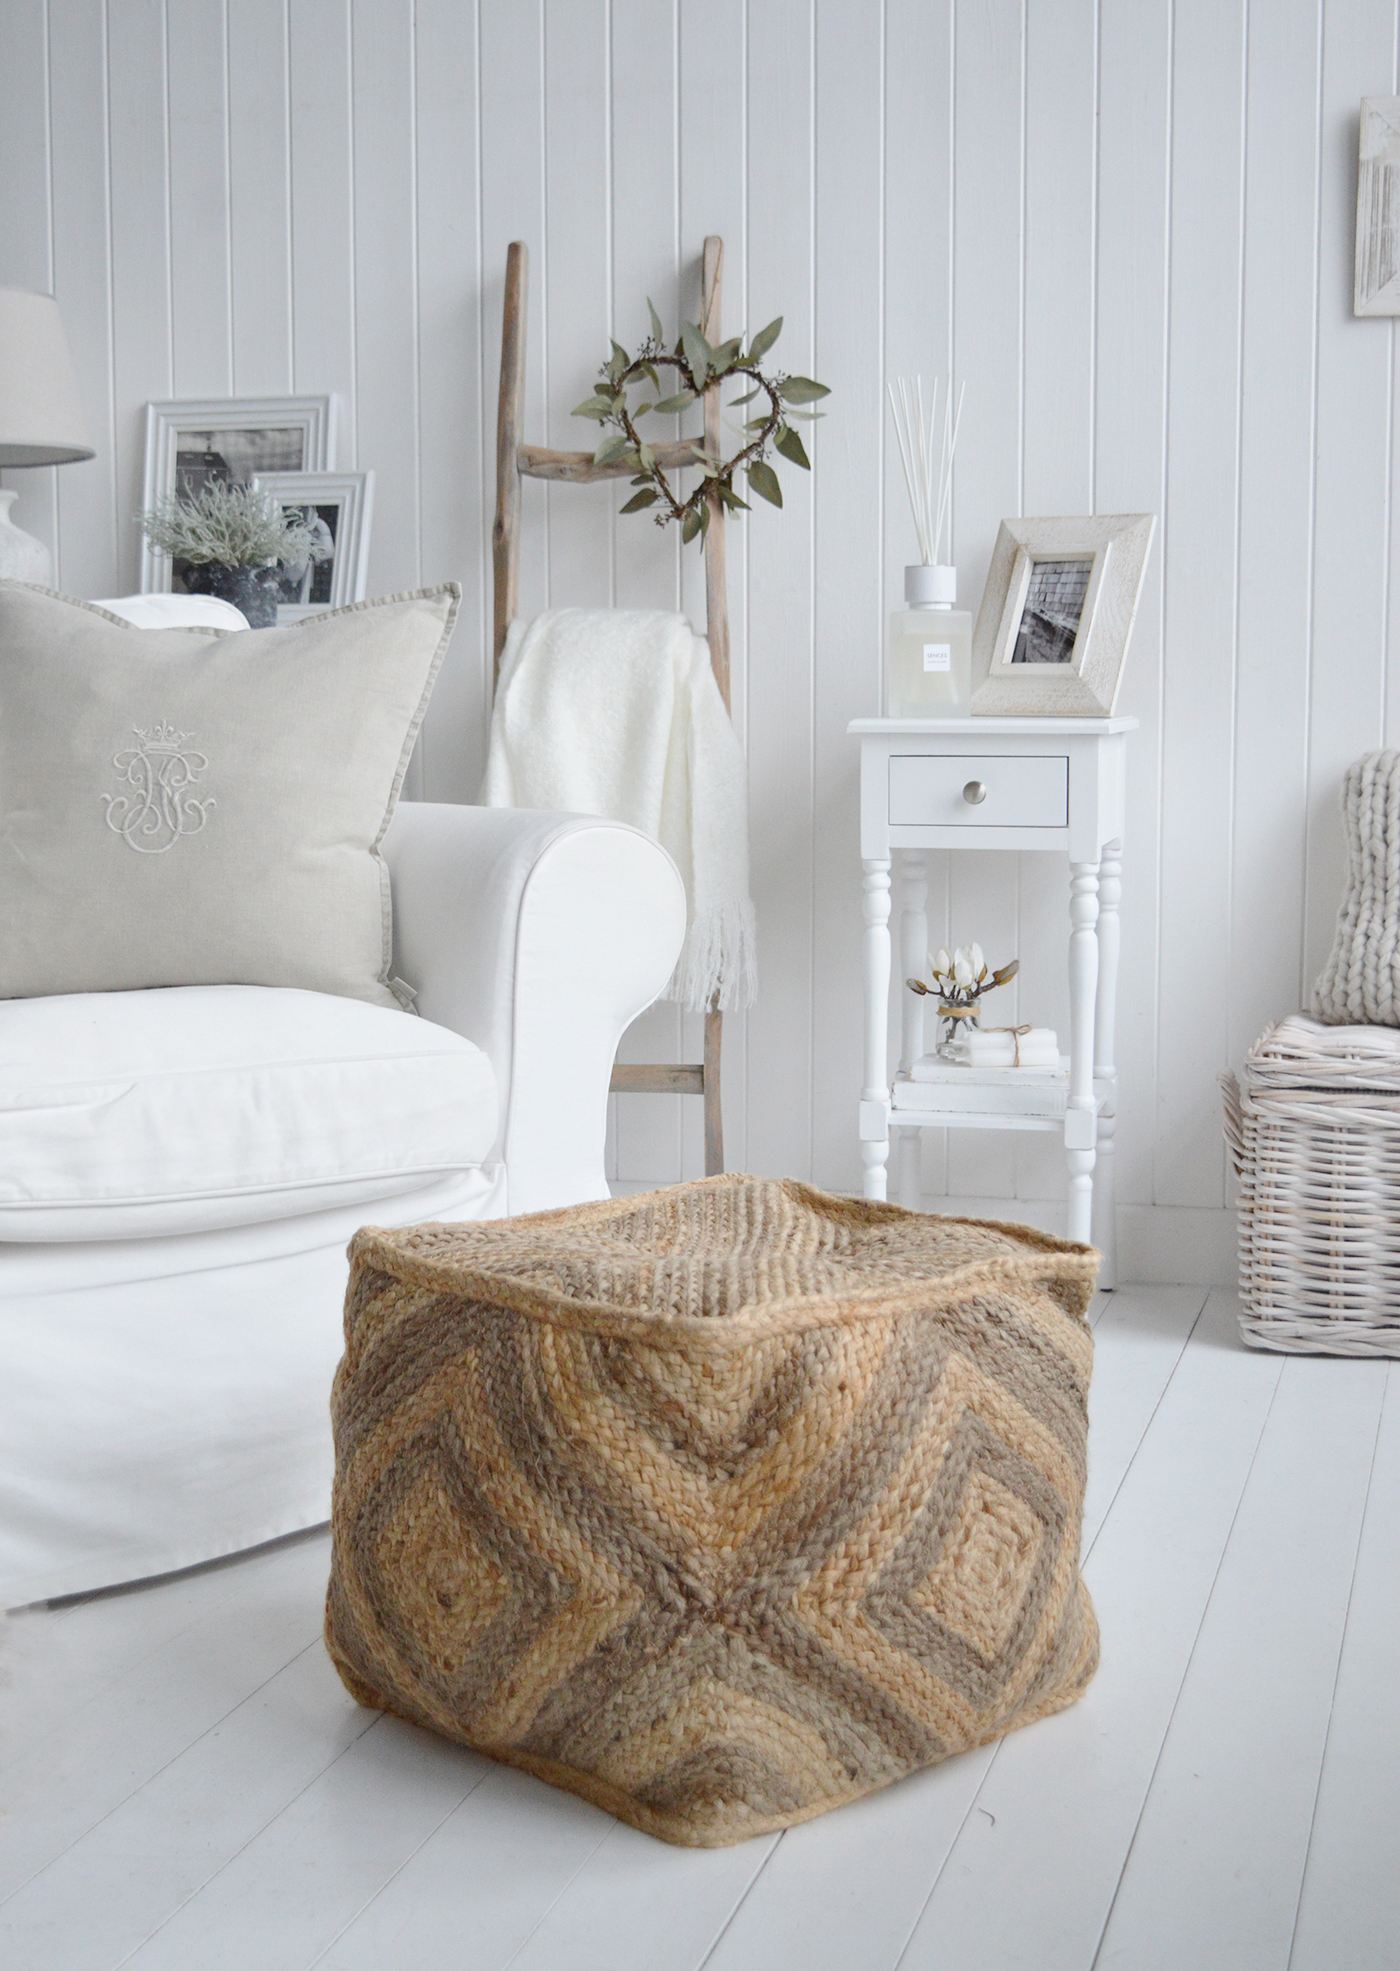 The Benton footstool in a white living room with touches of warmth from the driftwood ladder and cushions. Includes the white narrow Georgetown lamp table with a drawer and shelf